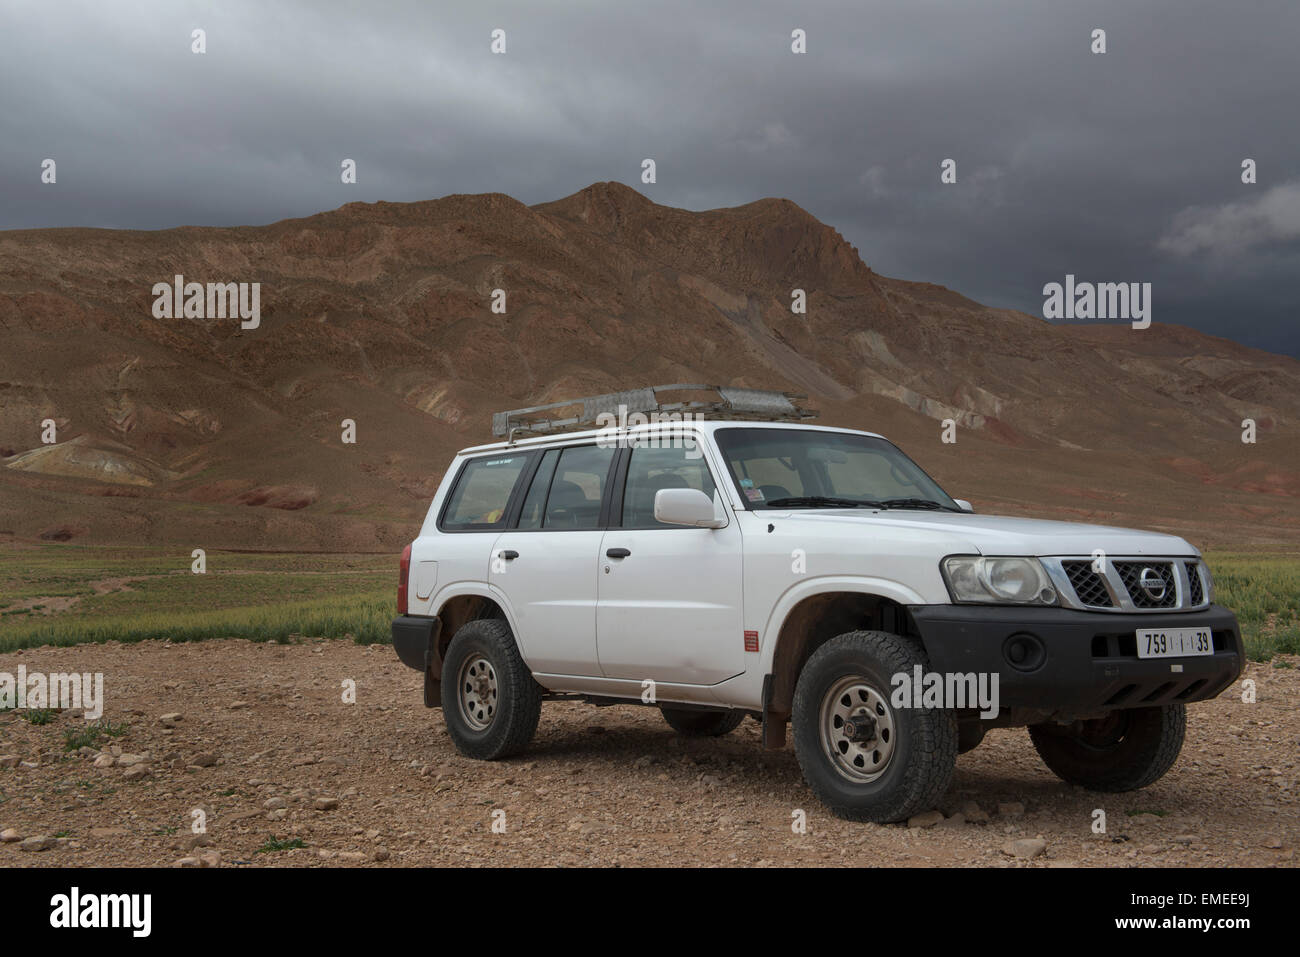 Nissan Pathfinder on dirt road in high Atlas Mountains, Morocco. Stock Photo